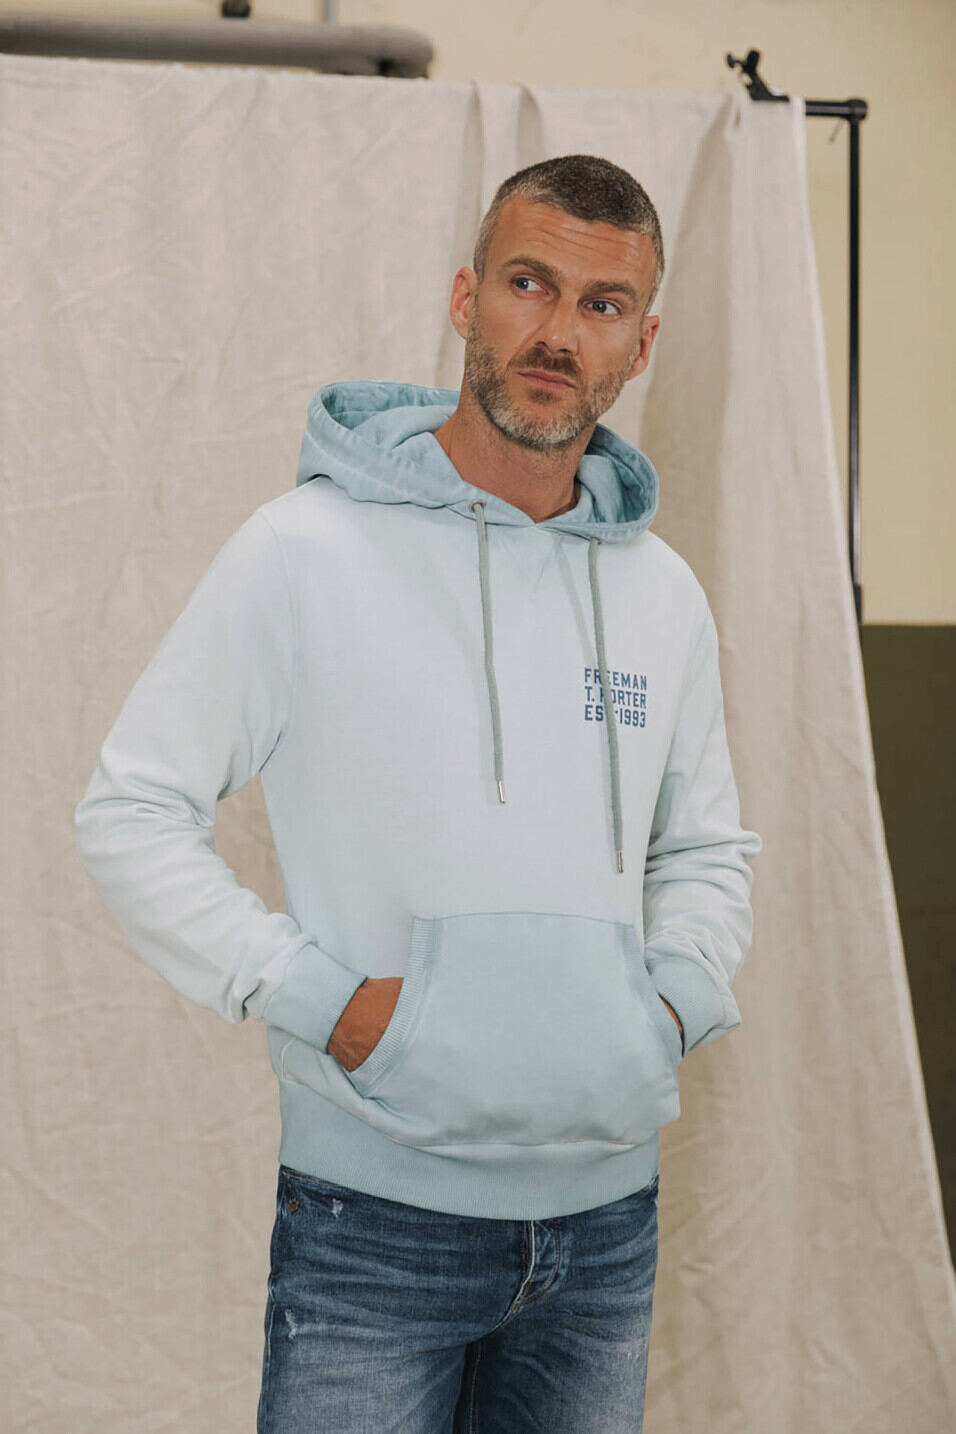 Loose Hoodie Man Nohan Chillout Blue sky | Freeman T. Porter